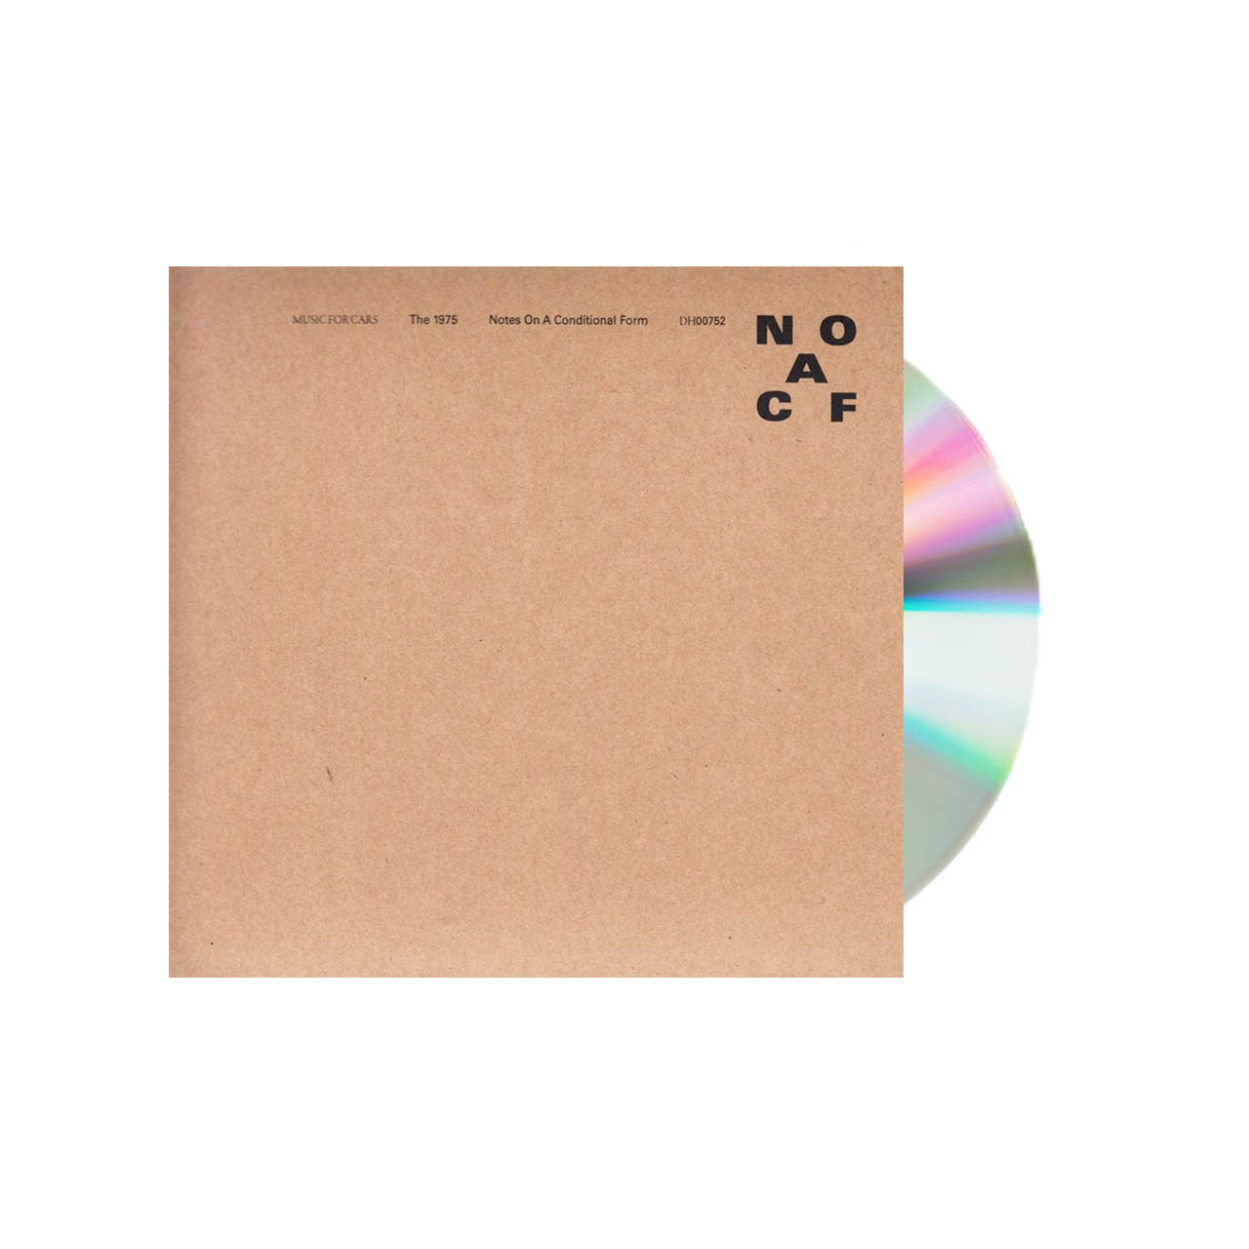 The 1975 Notes On A Conditional Form CD